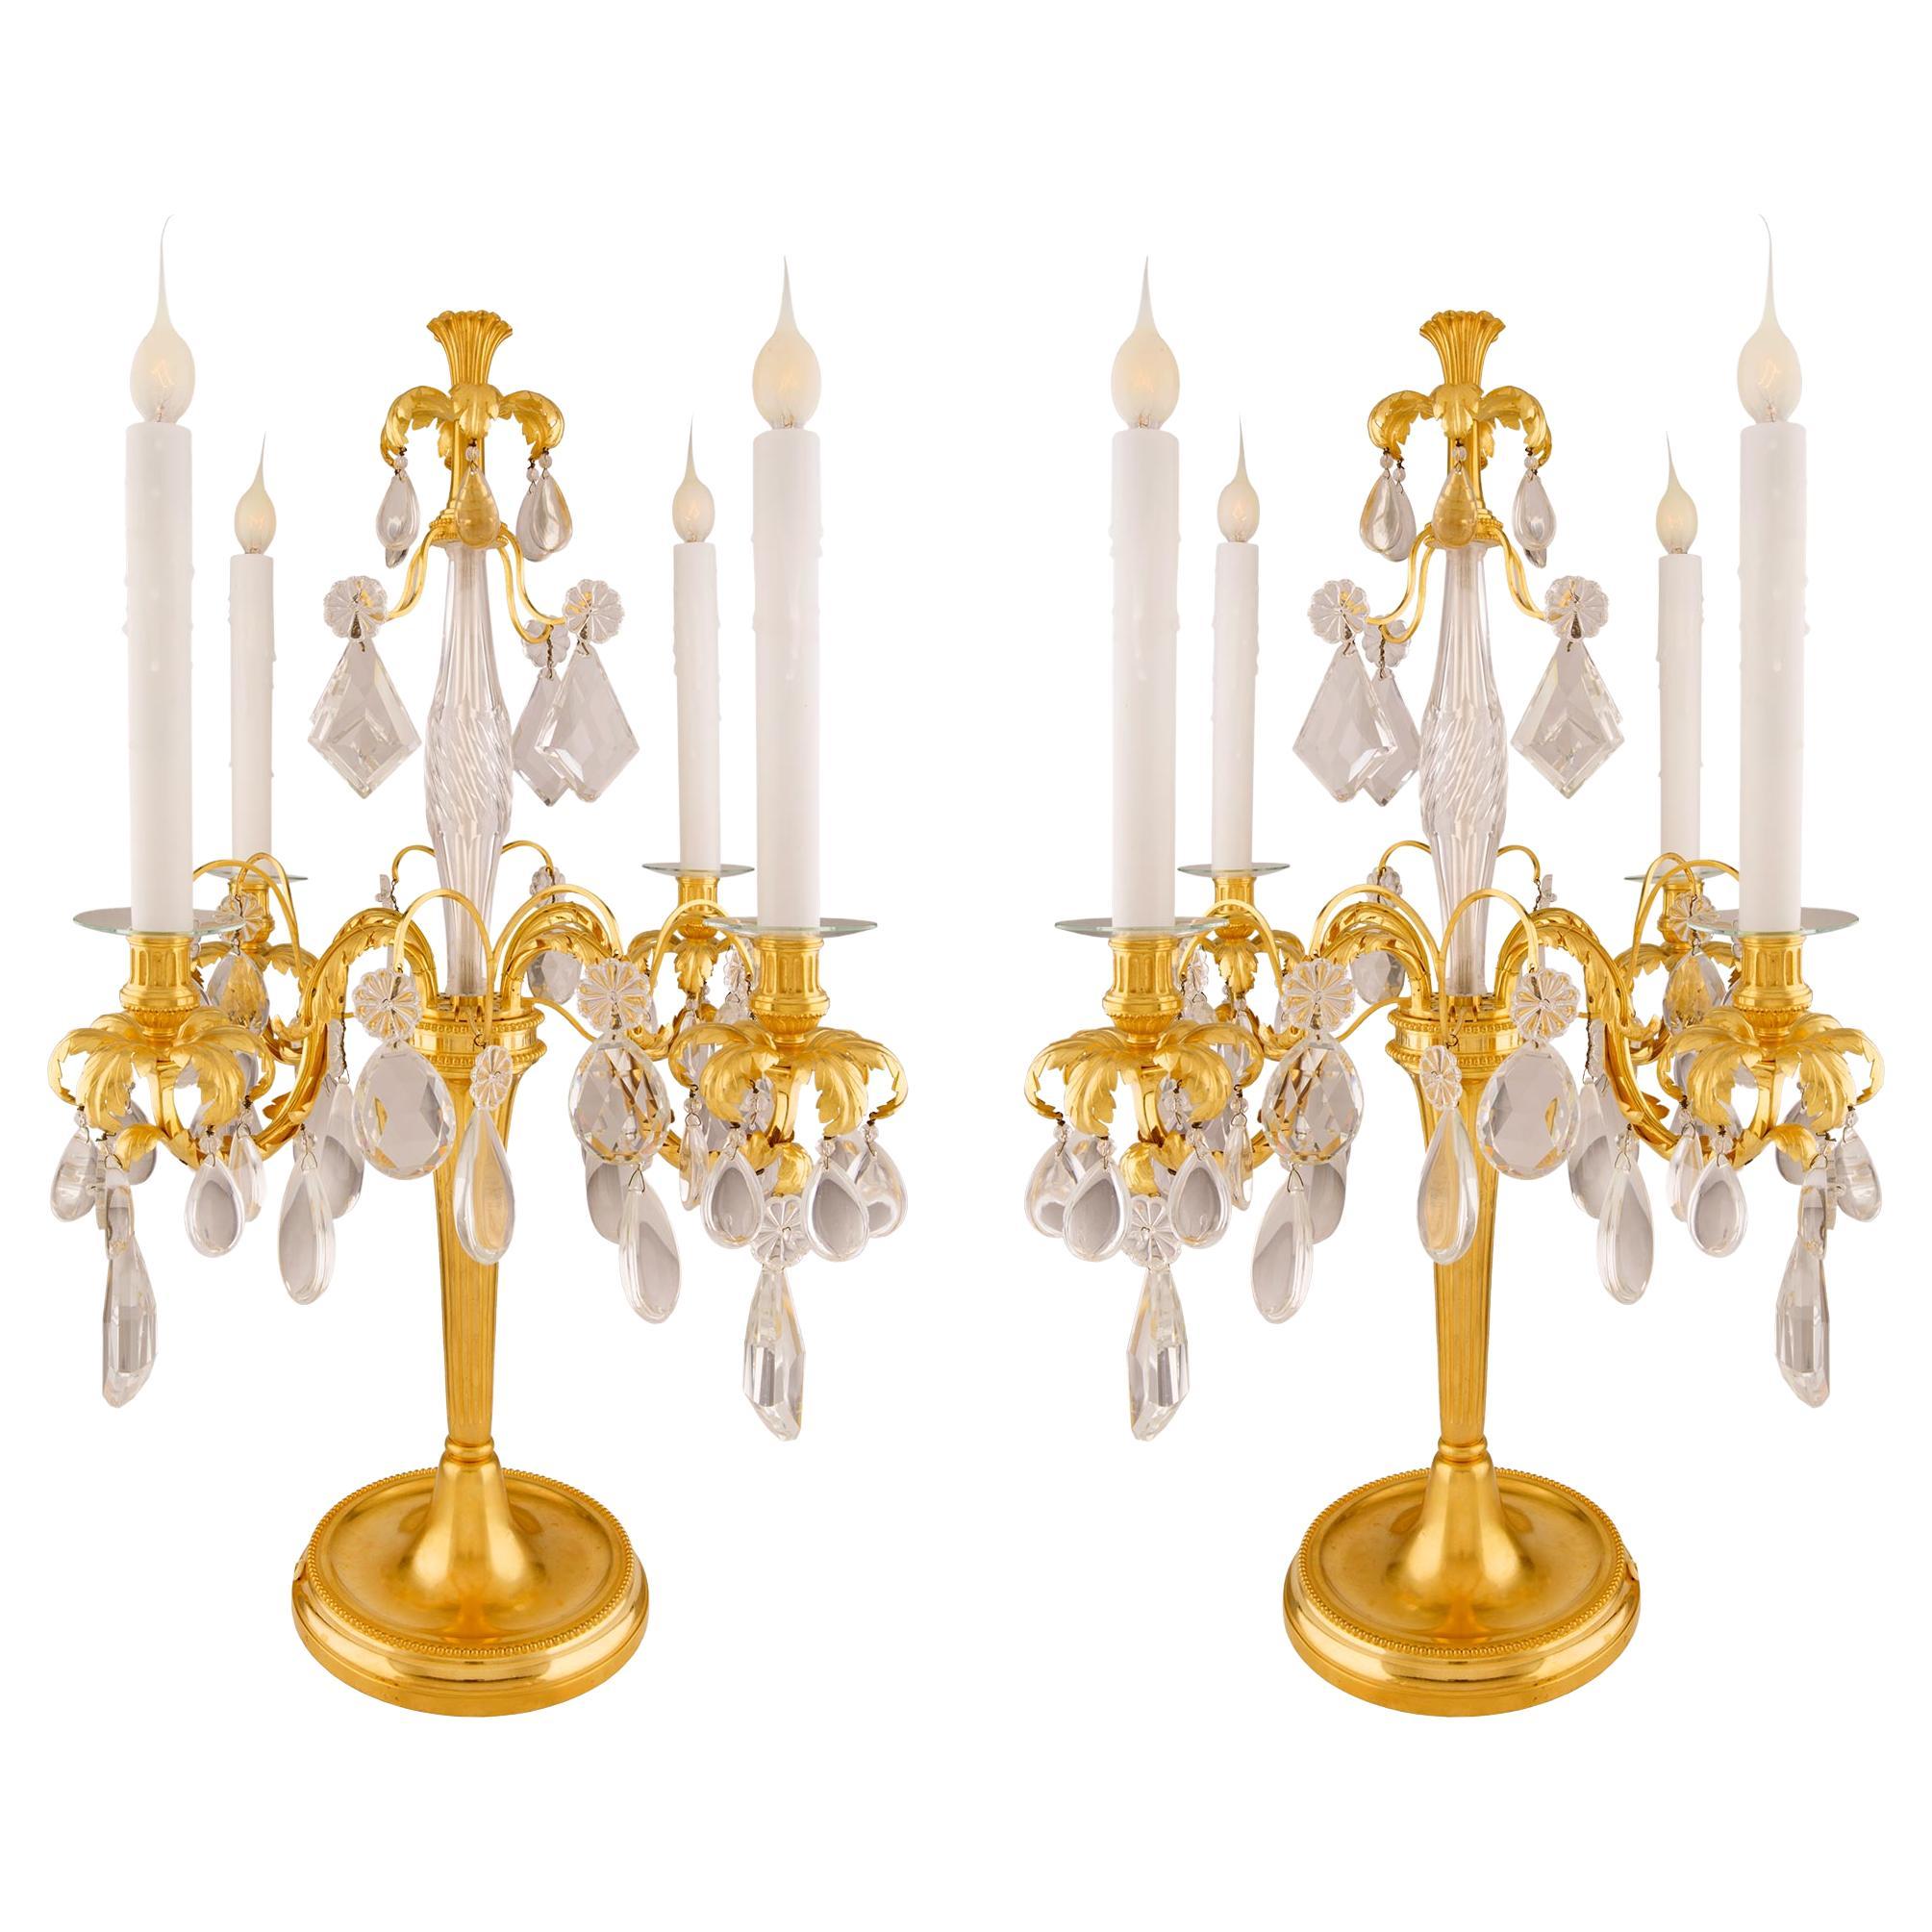 Pair of French Mid-19th Century Louis XVI Style Four-Arm Girandole Lamps For Sale